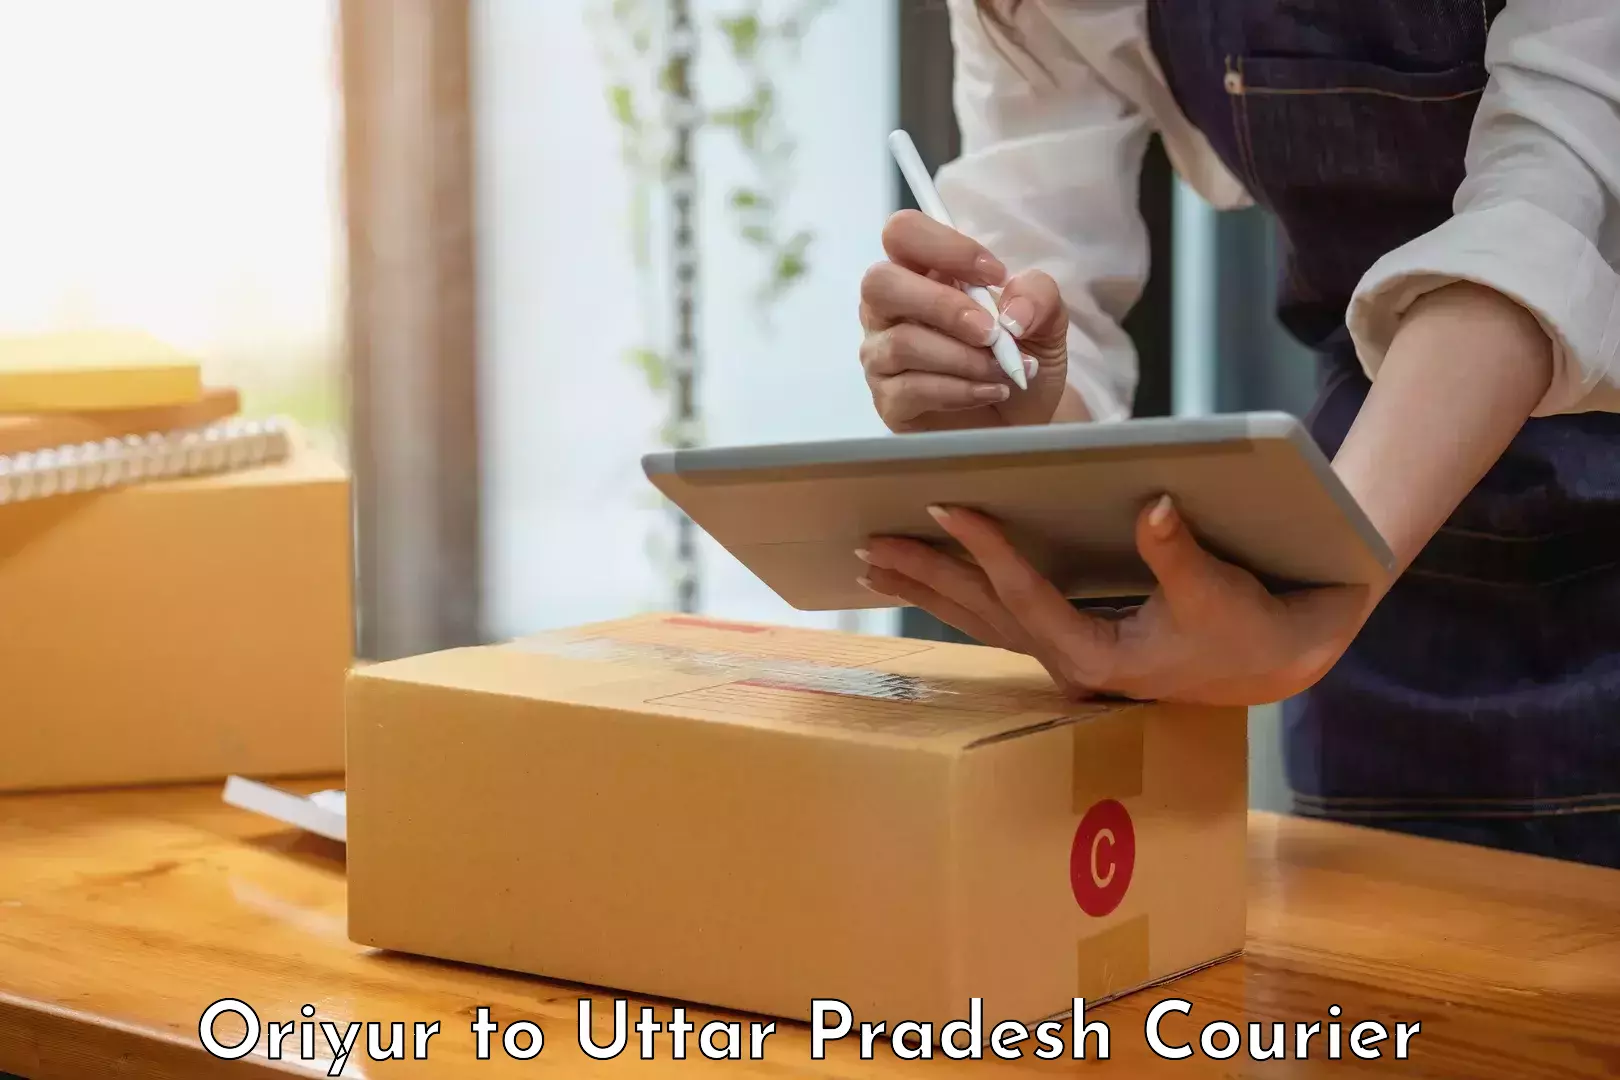 Round-the-clock parcel delivery Oriyur to Sadat